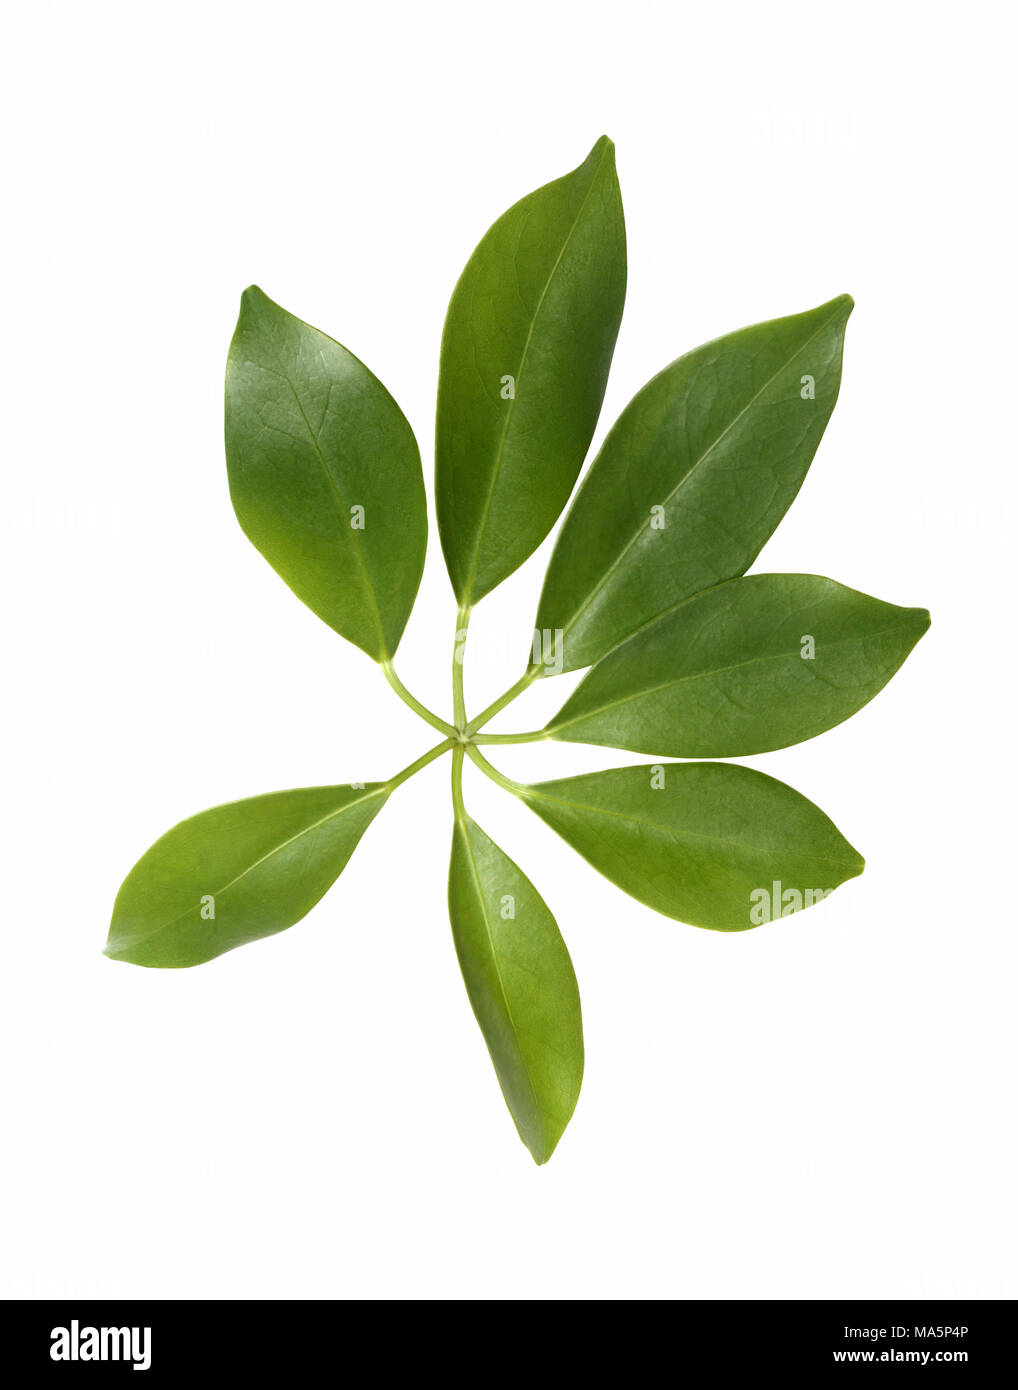 Home plant with green leaves isolated on white background with clipping path Stock Photo